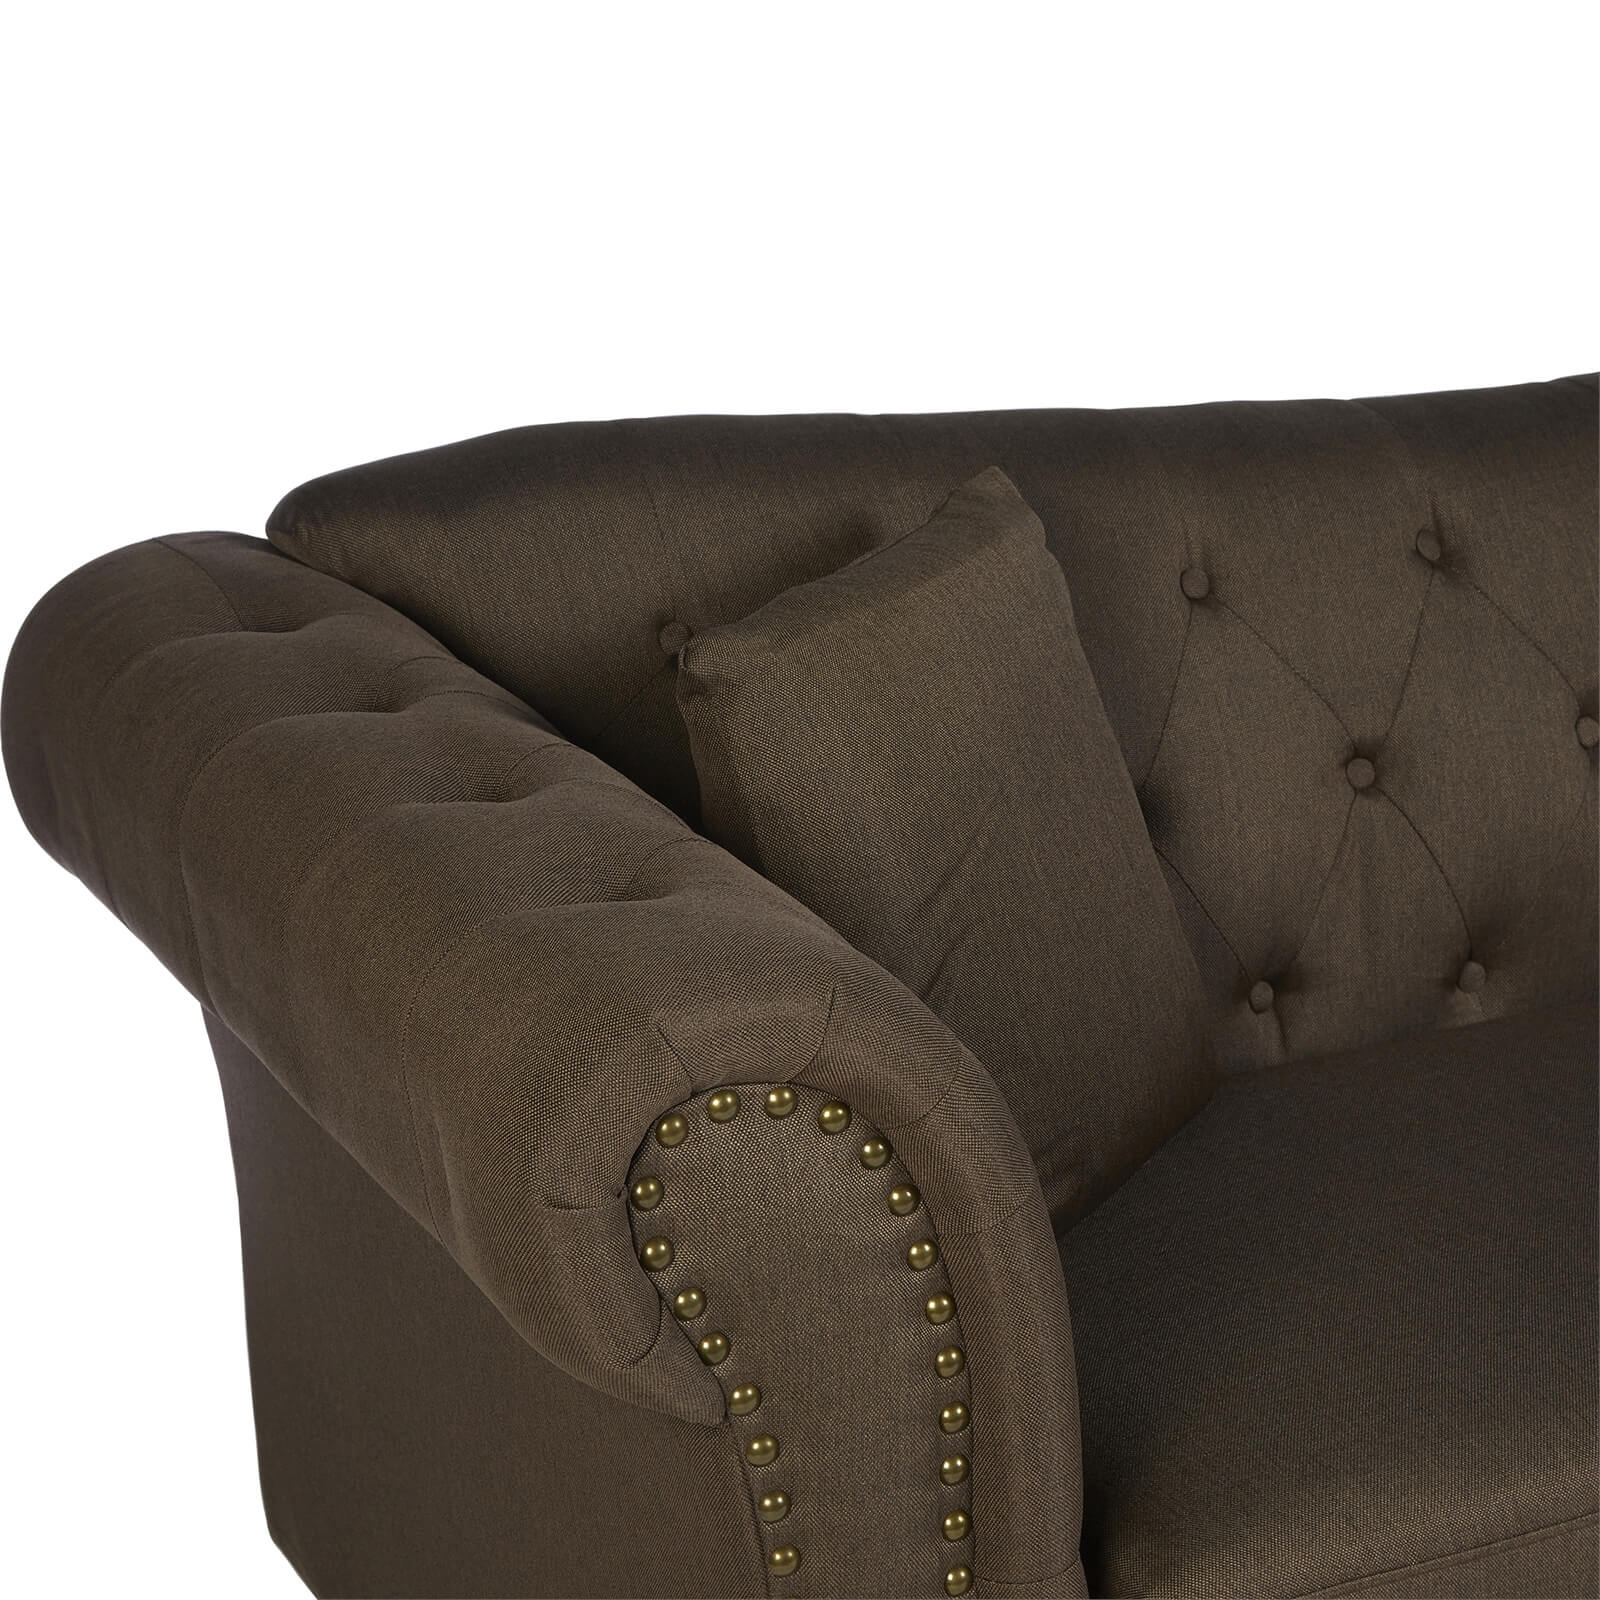 Fable 3 Seat Chesterfield Sofa - Natural